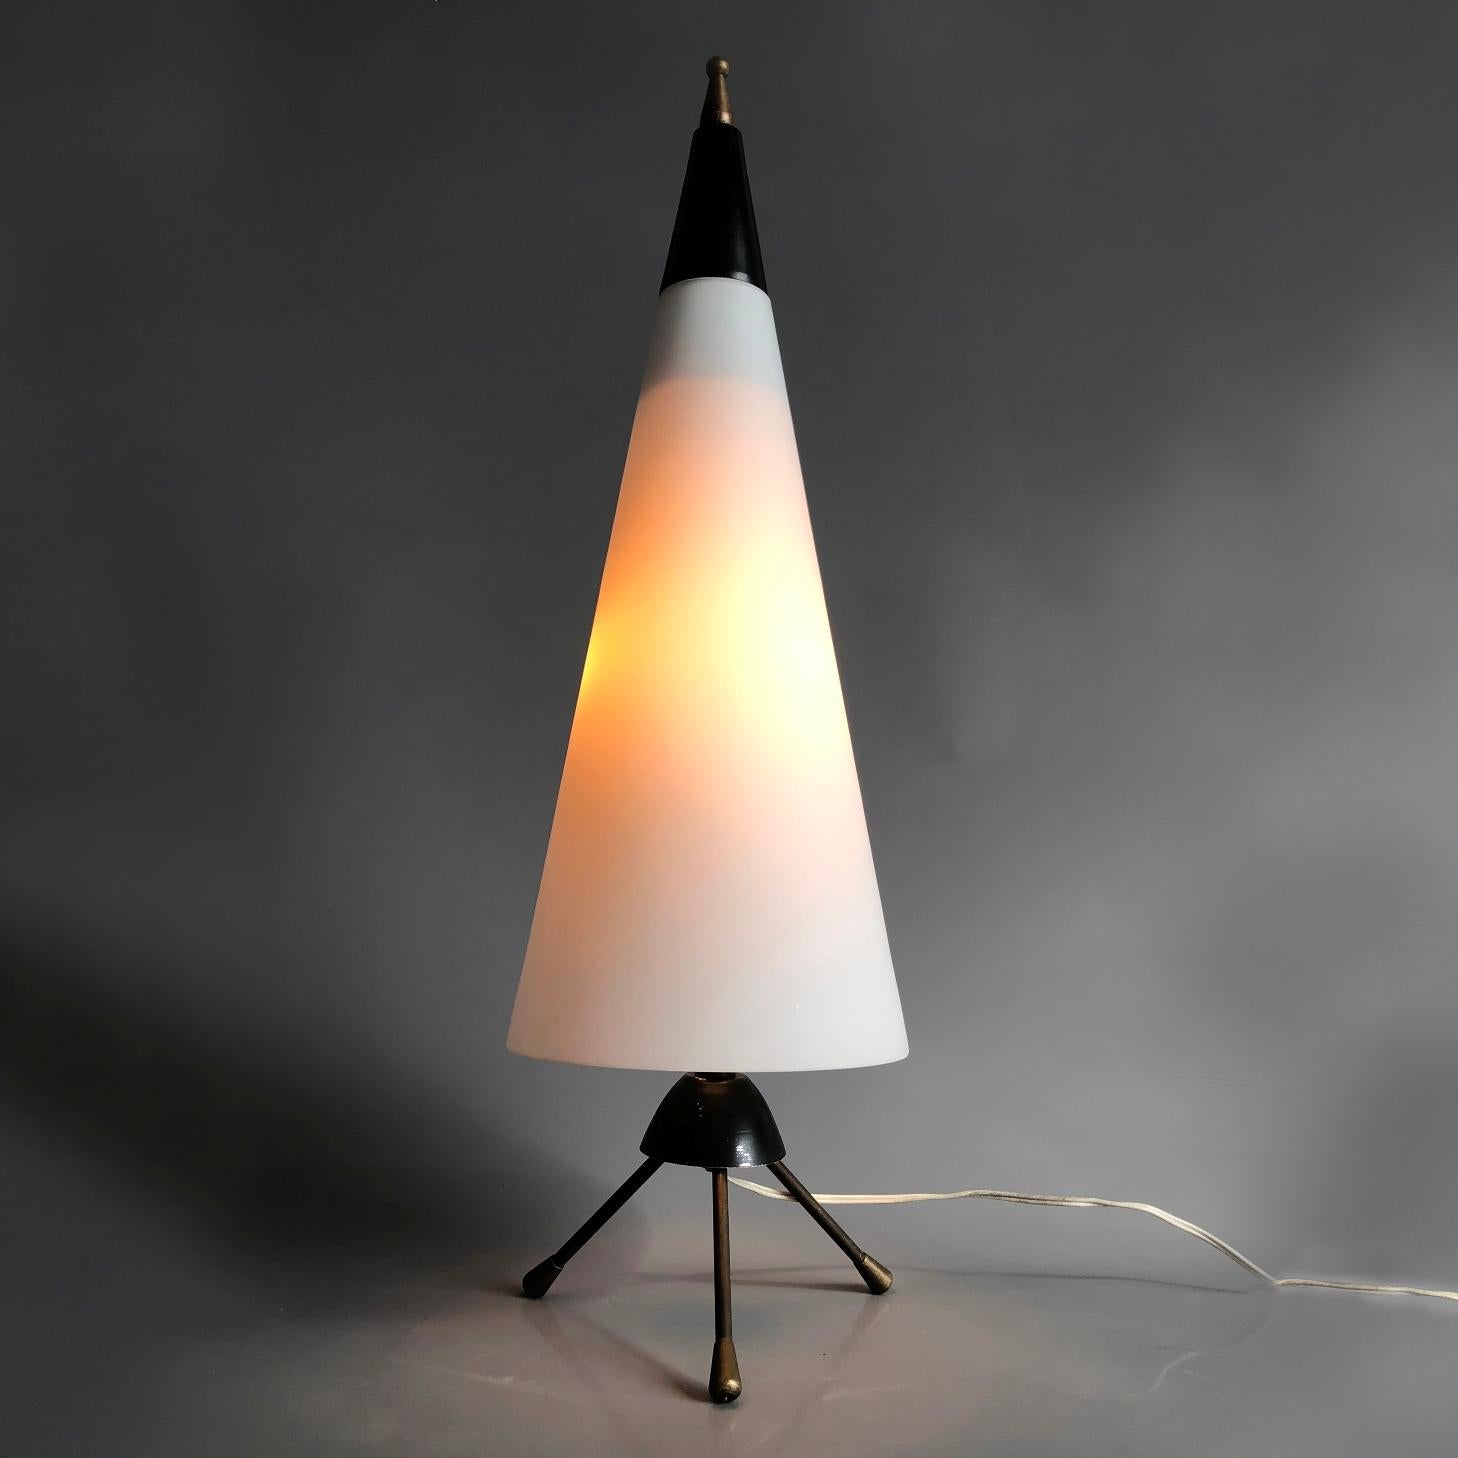 Painted Space Age Modernist Conical Table Lamp, Italy, 1960s For Sale